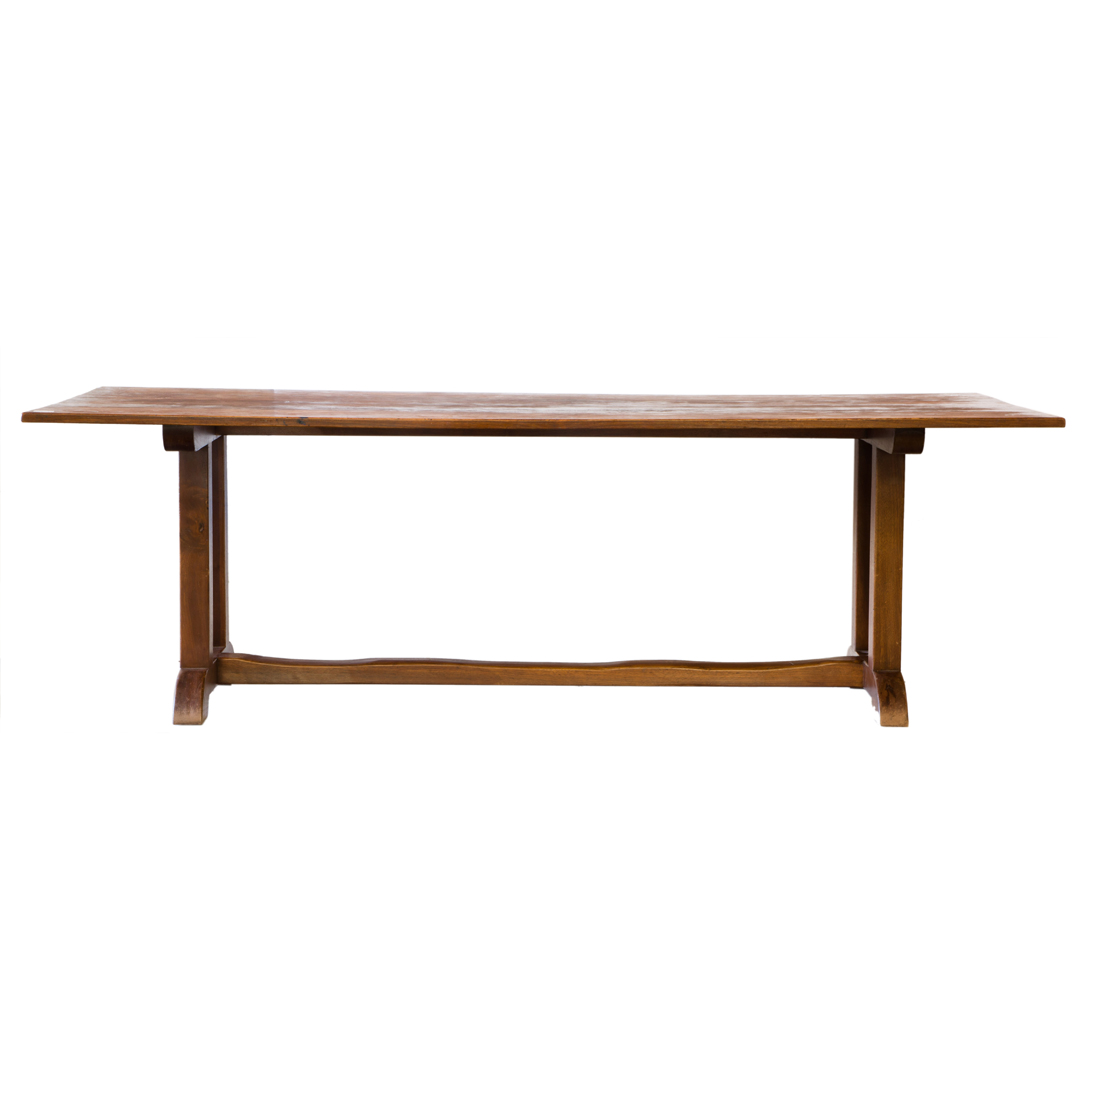 A CONTINENTAL REFECTORY TABLE A